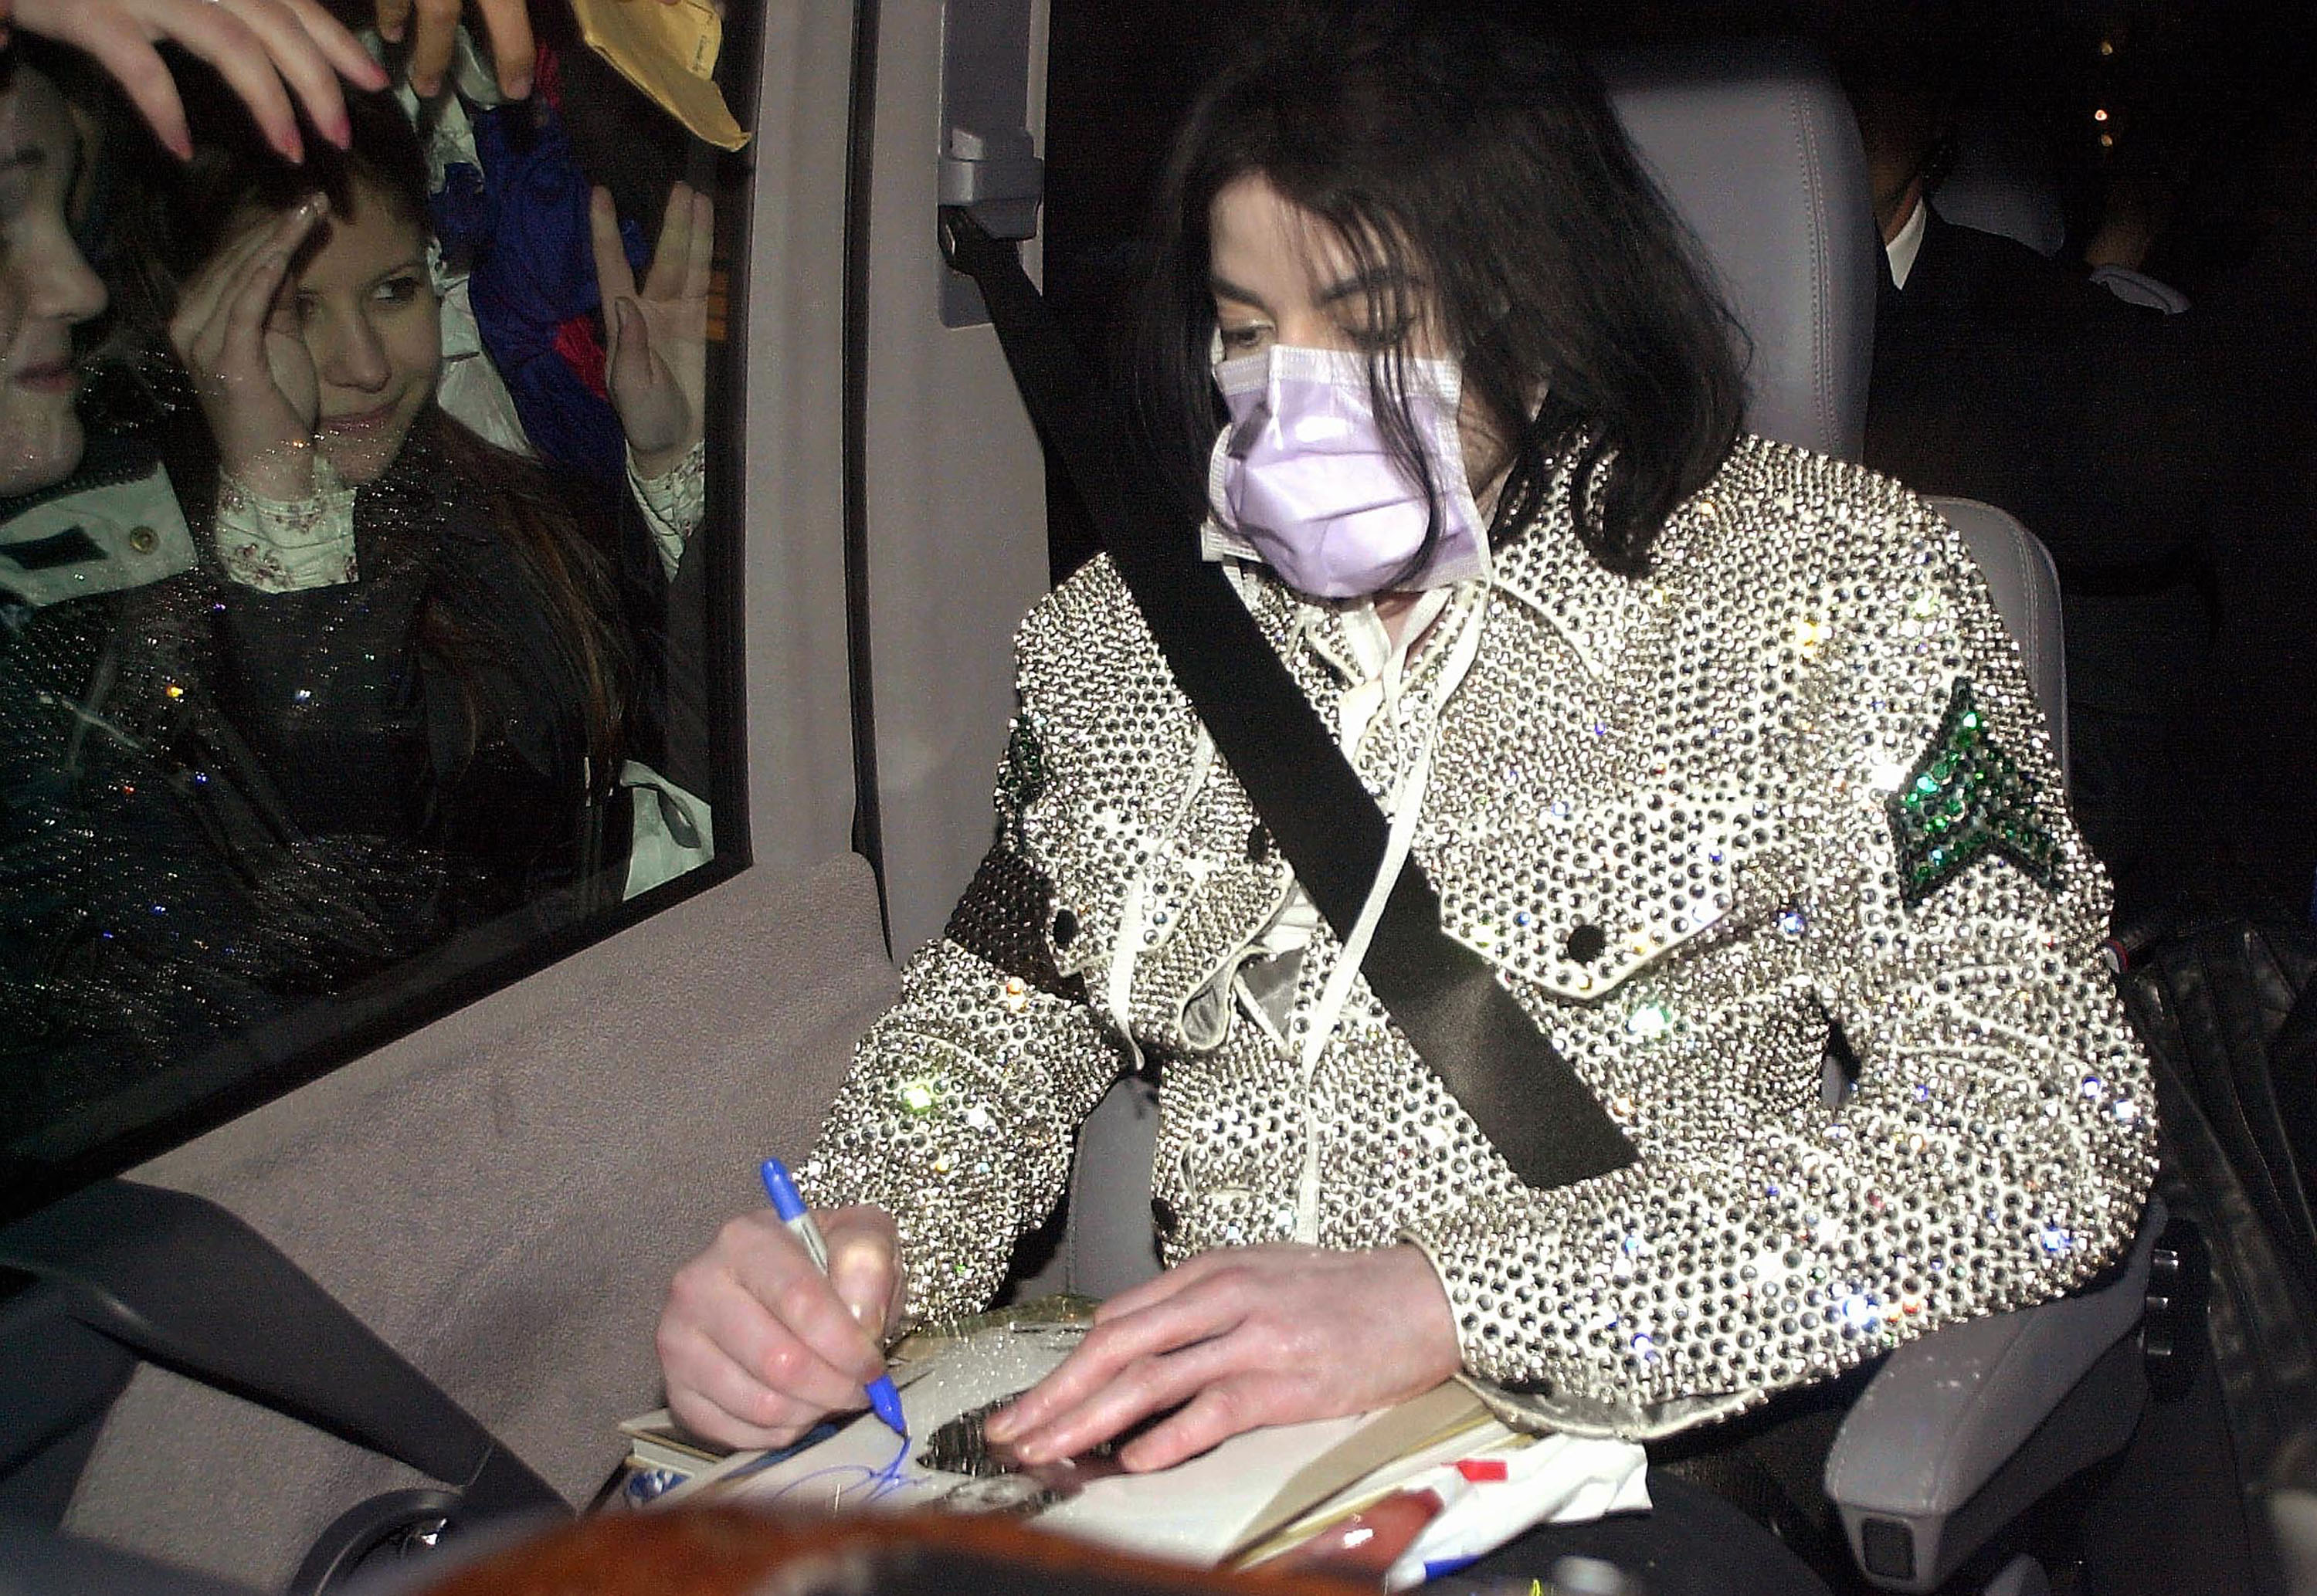 Michael Jackson leaves the Adlon Hotel on November 19, 2002 in Berlin | Source: Getty Images